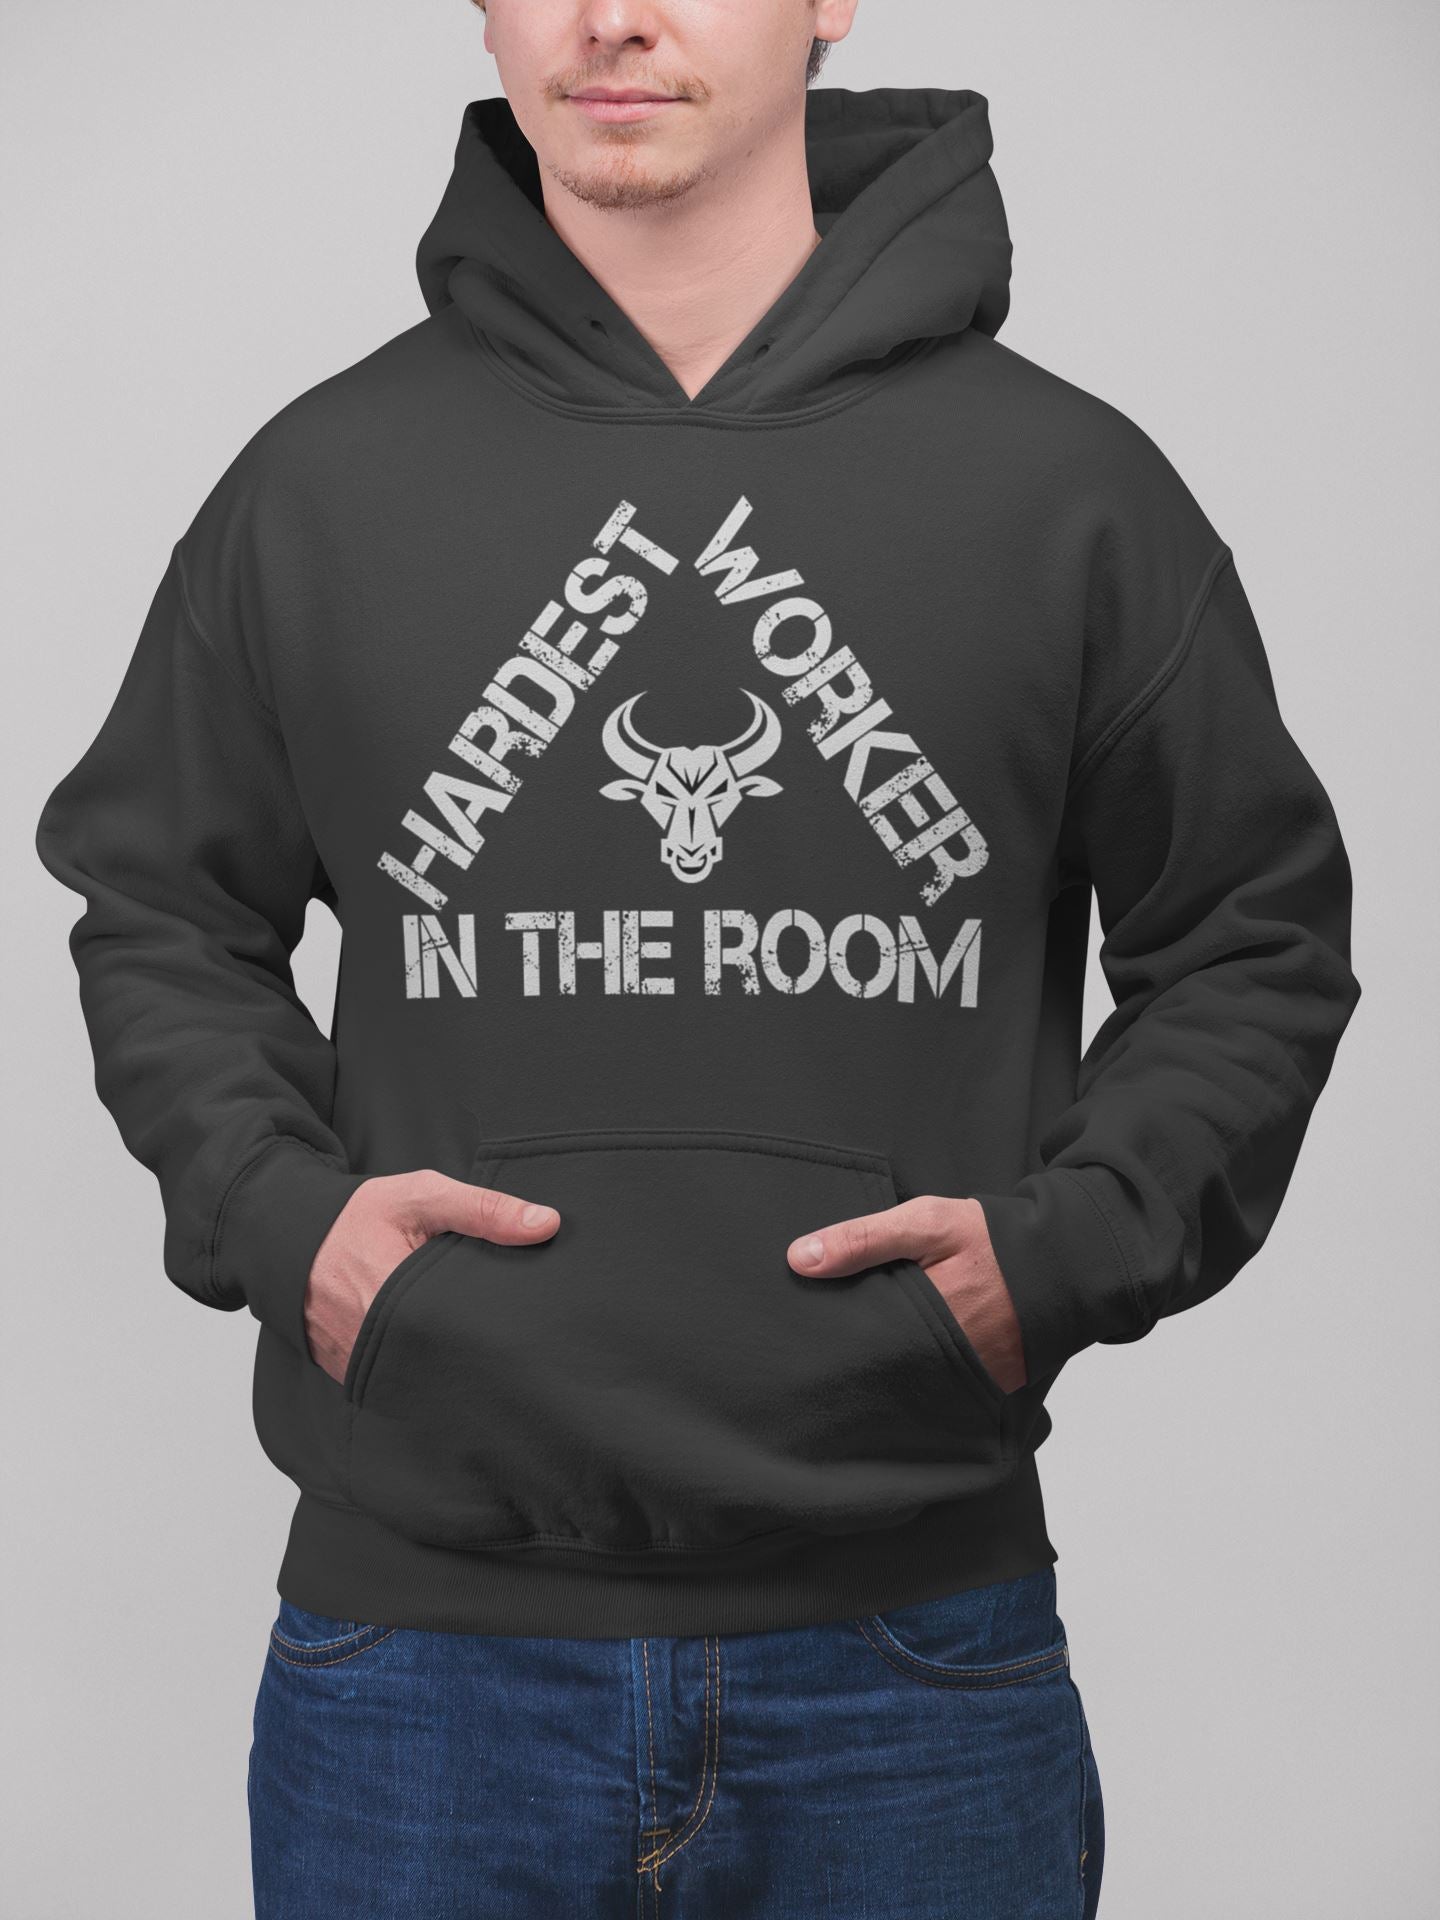 Hardest Worker in the Room Exclusive Black Swag Hoodie for Men and Women freeshipping - Catch My Drift India